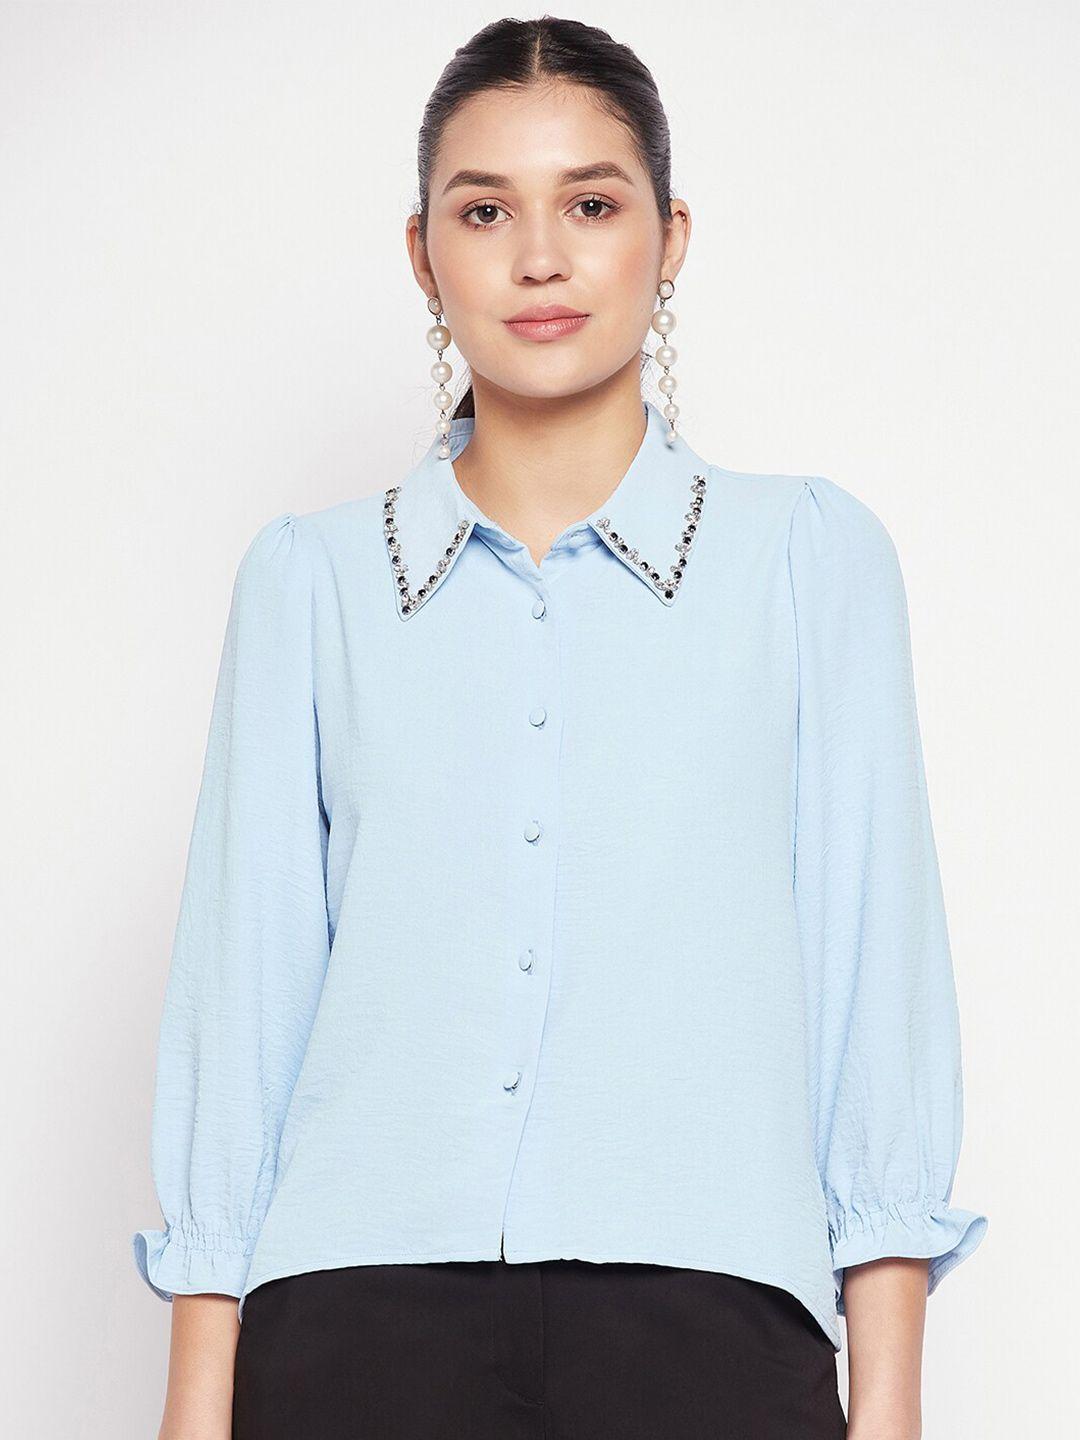 madame bell sleeves embellished casual shirt